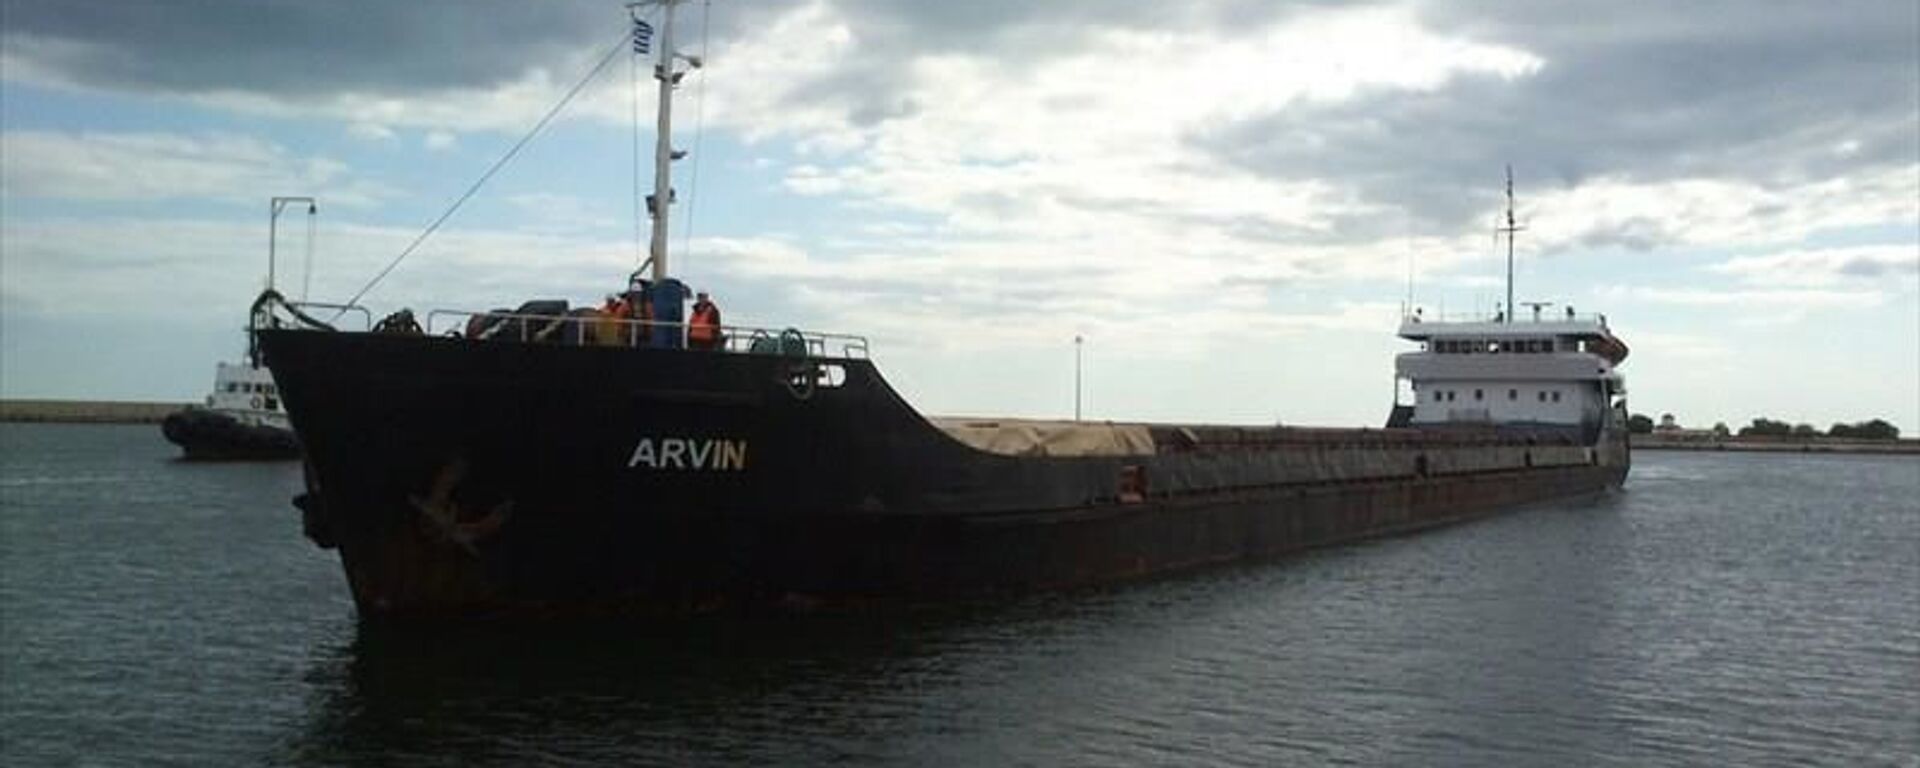 Arvin, the dry cargo vessel reported to have sunk in the Black Sea off the coast of Turkey on 17 January, 2020. - Sputnik International, 1920, 15.12.2023